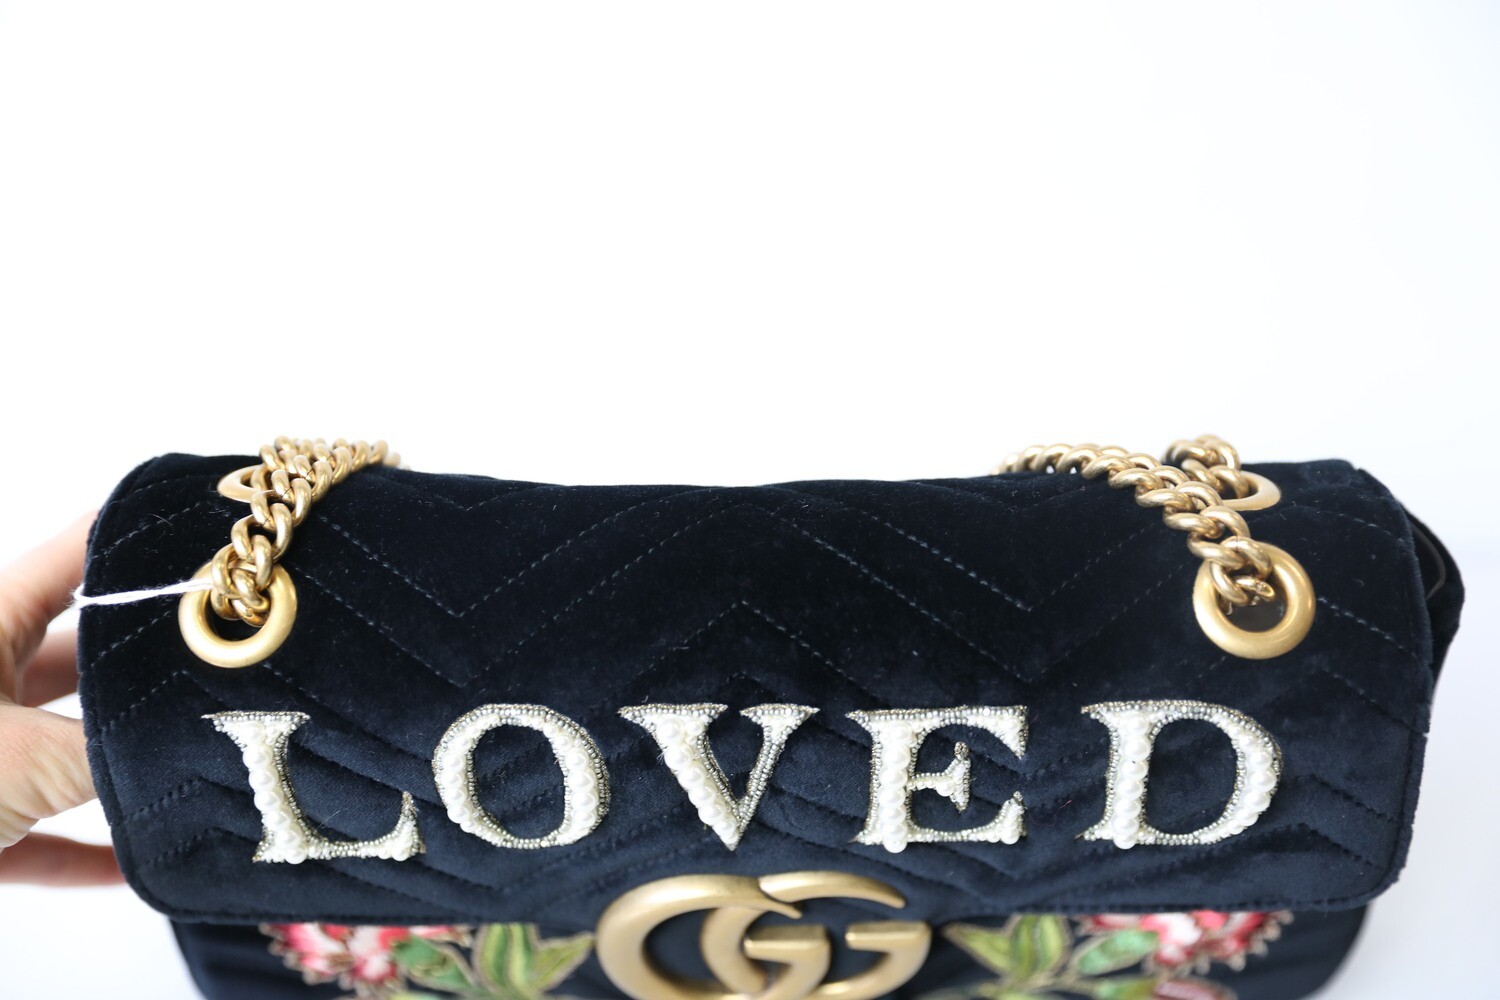 Gucci Marmont Medium, Black Velvet Loved Embroidered, New in Dustbag WA001